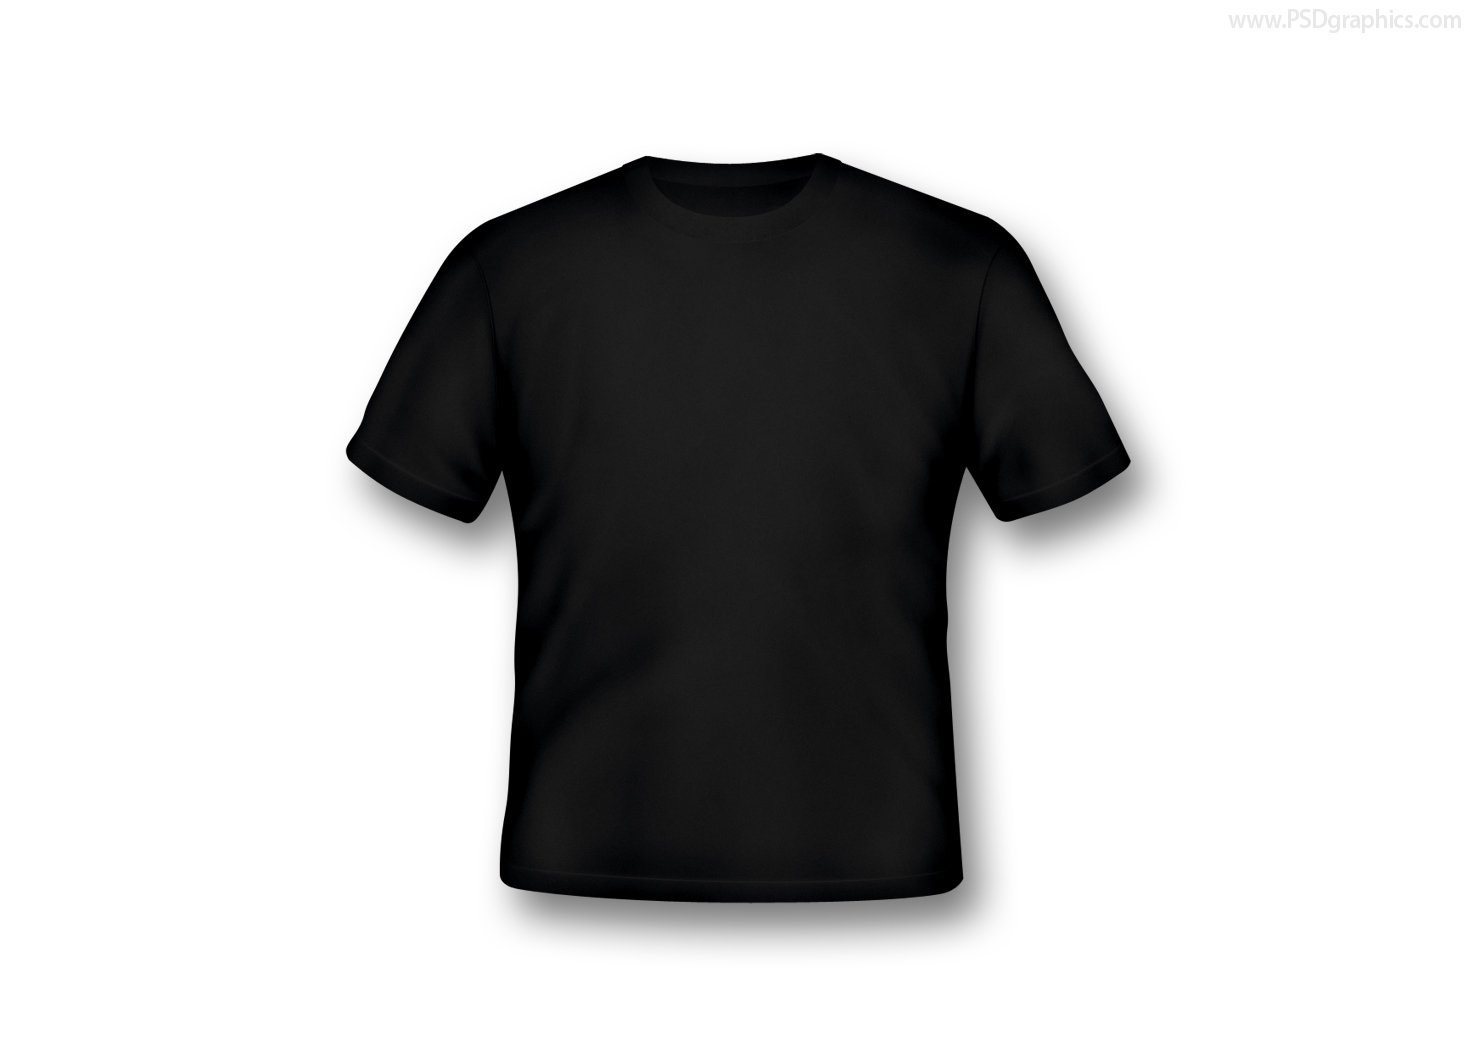 Blank t-shirts in various colors - PSDgraphics